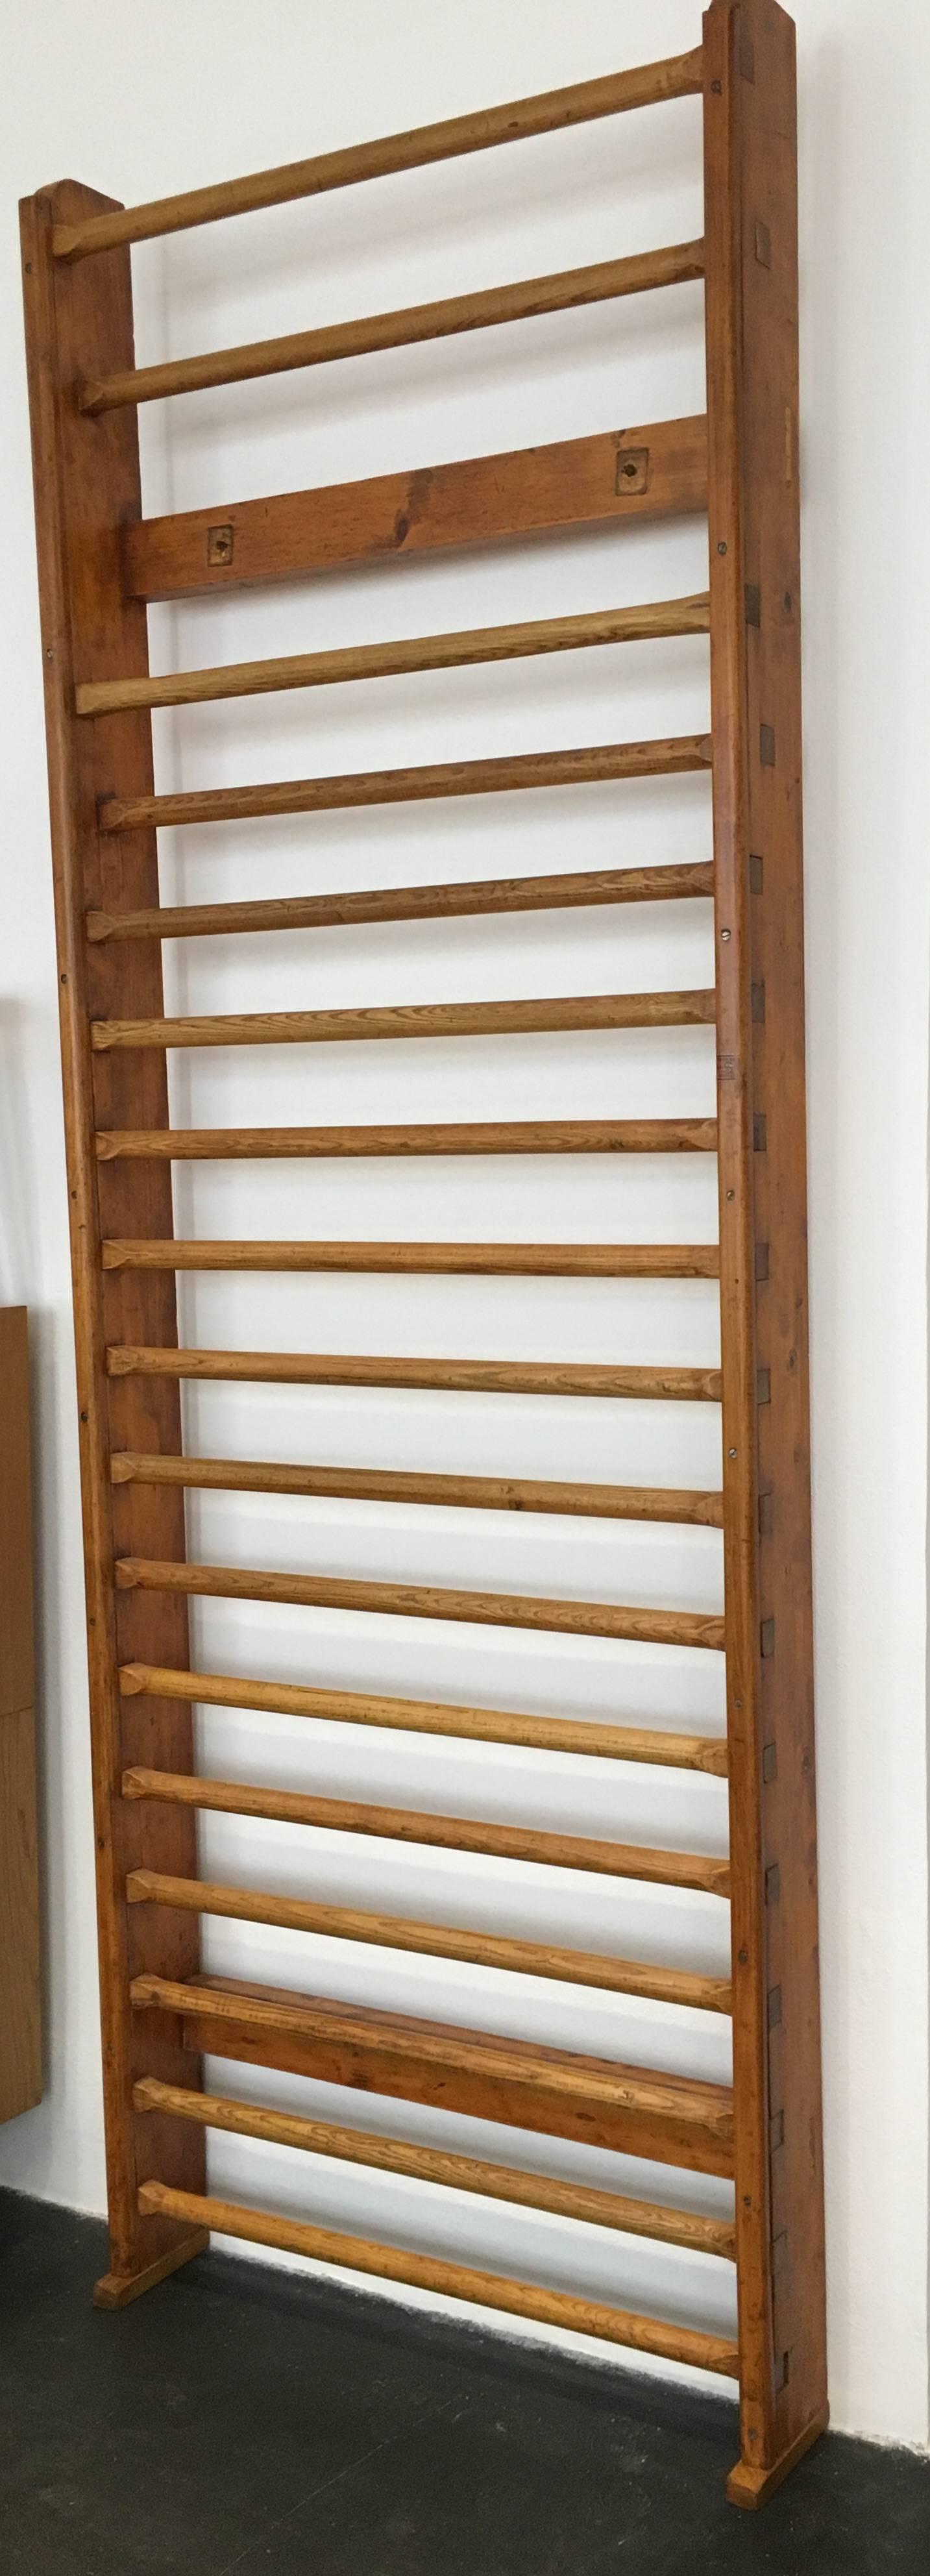 This wall bar from an old gym was completely restored, the wood shows a beautiful patina. Whether for a daily workout or as an object that also serves as a clothes rack or towel rack, this wall bars is definitely a real eye-catcher.
 